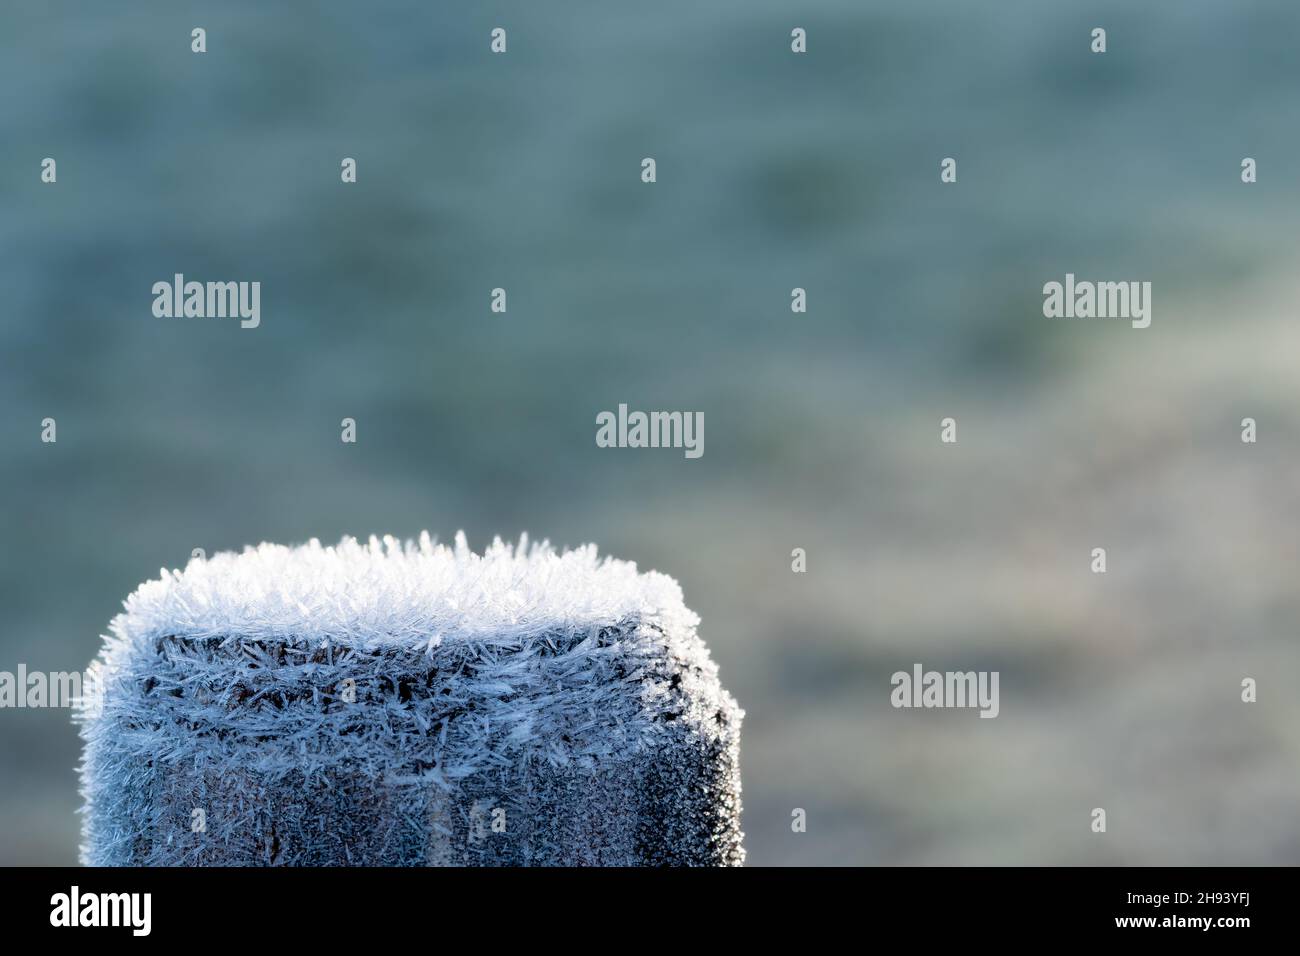 Top of a wooden fence pole covered with ice crystals, back-lit by morning sun. Concepts of frosty winter season, cold temperature, hoarfrost. Macro. Stock Photo